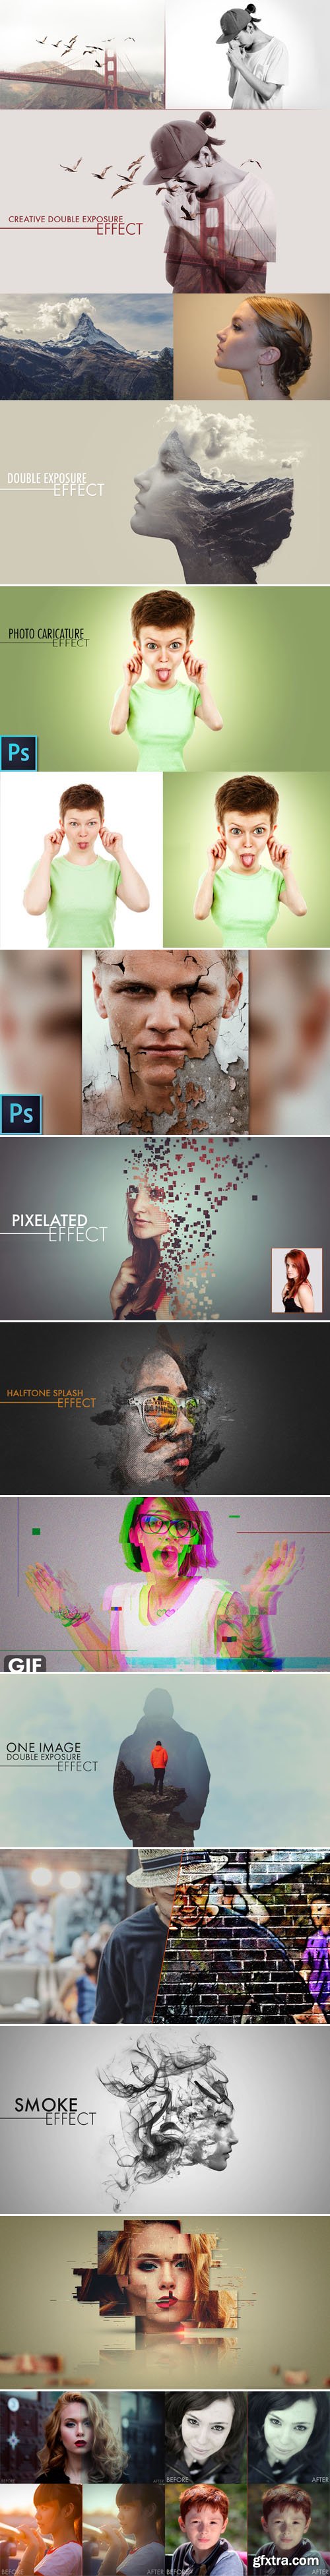 12 Awesome PSD Effects Bundle